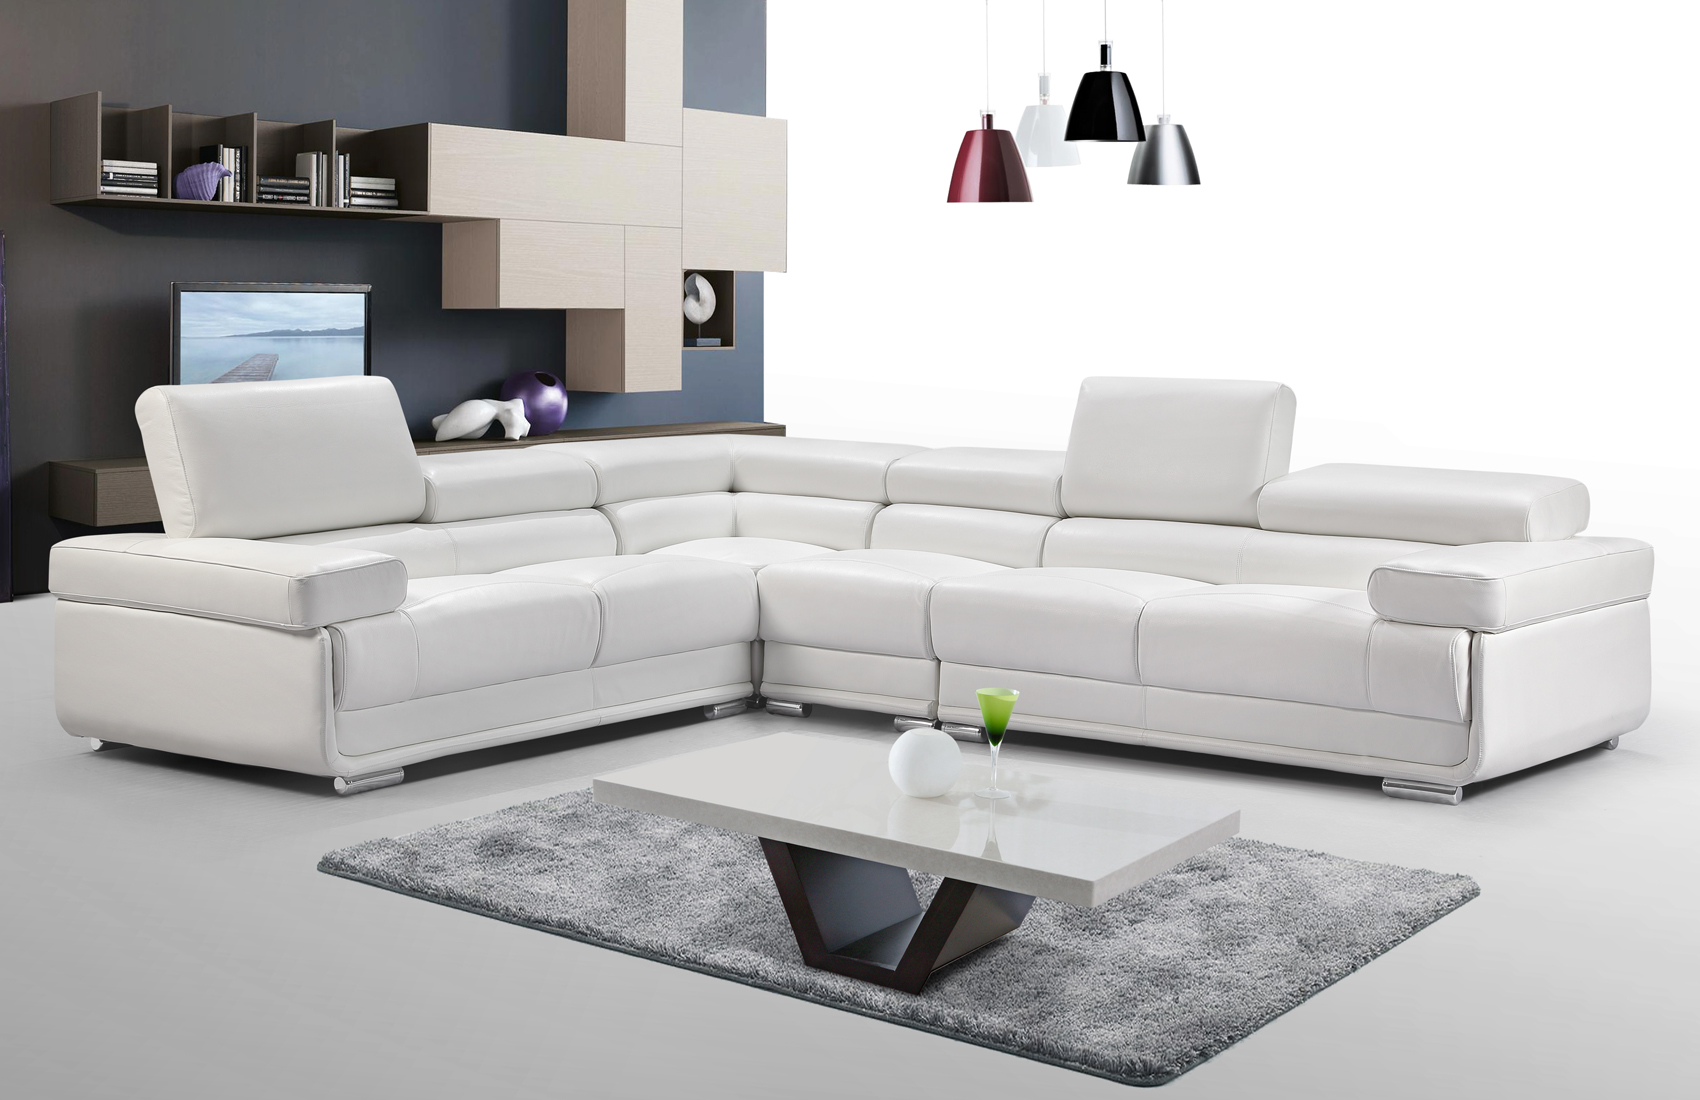 Brands ALF Capri Coffee Tables, Italy 2119 Sectional White